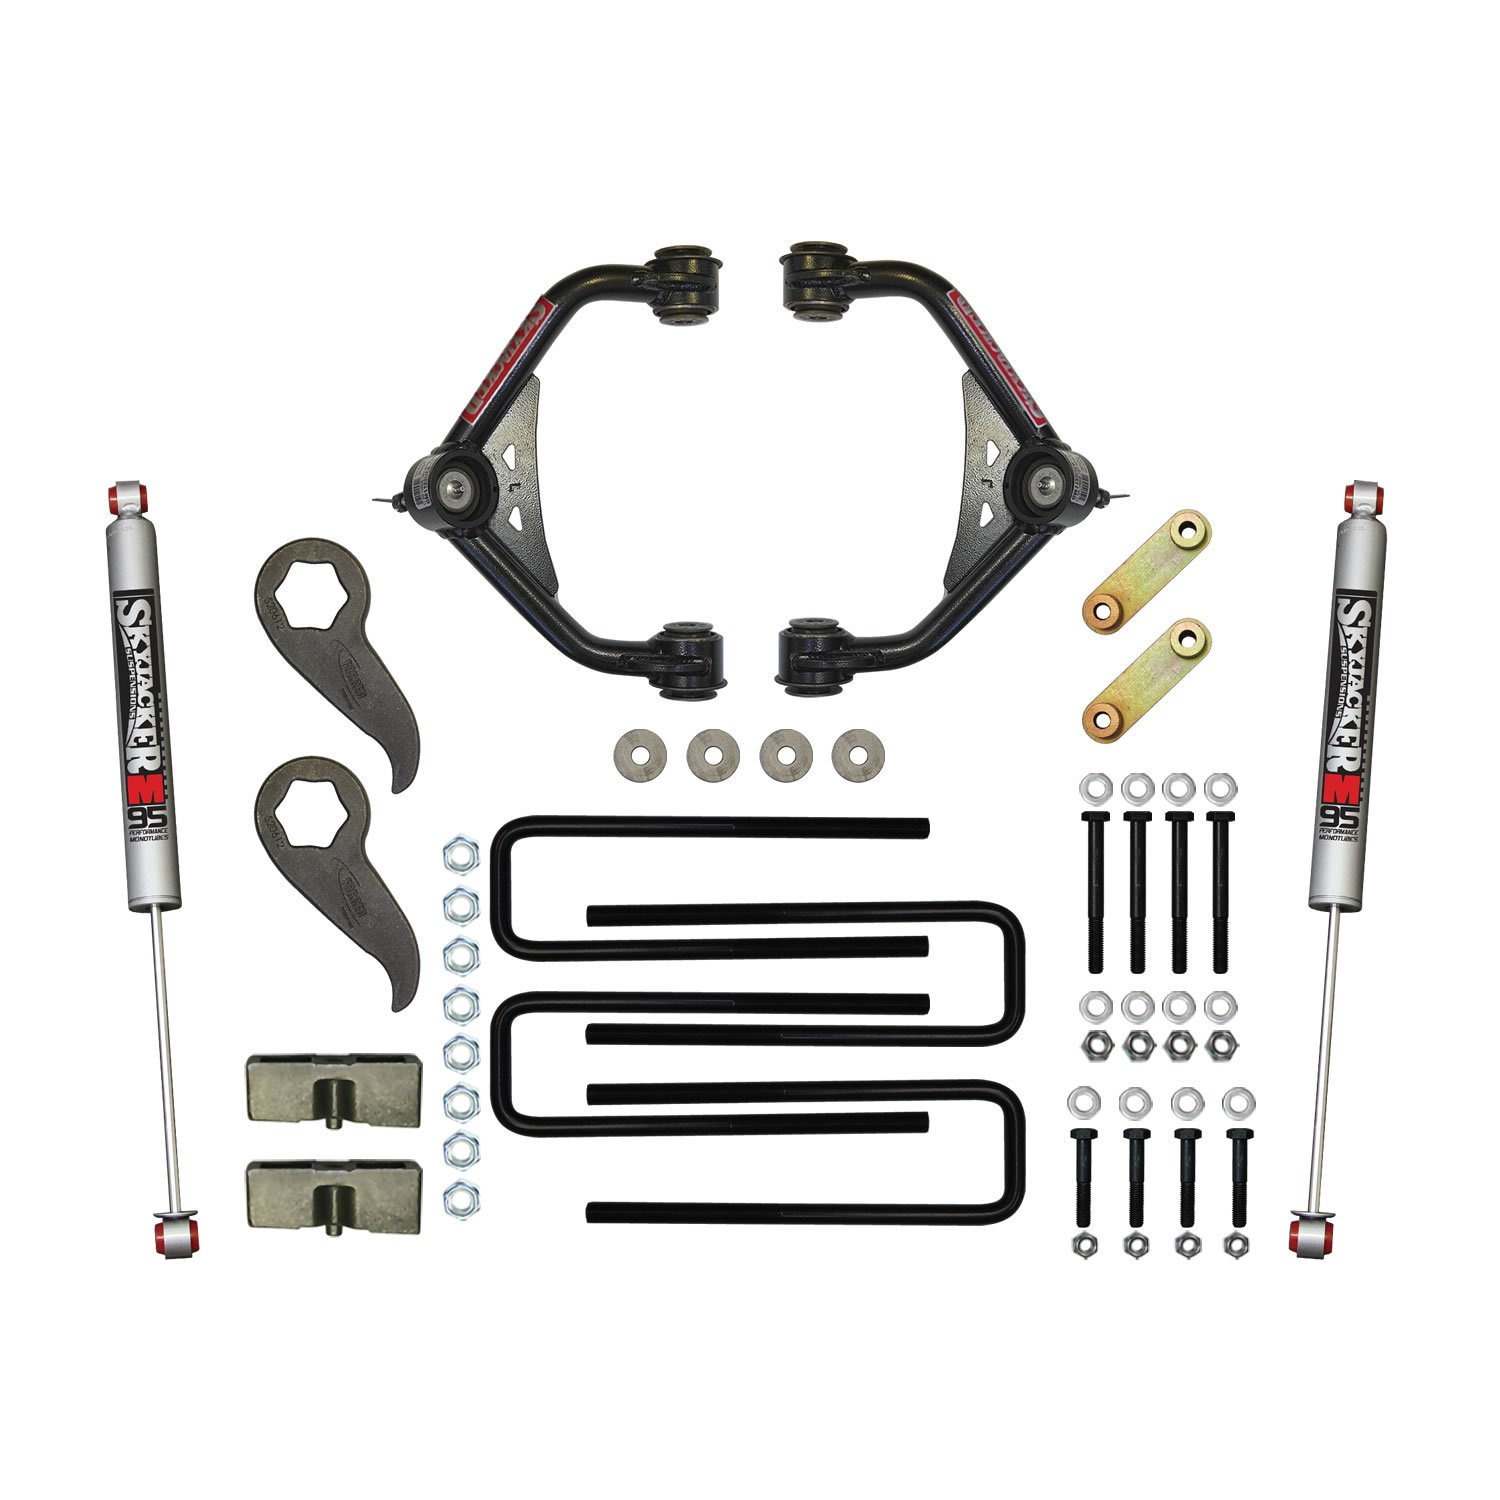 3.000-3.500 In. Upper Control Arm Lift Kit with Nitro 8000 Rear Shocks